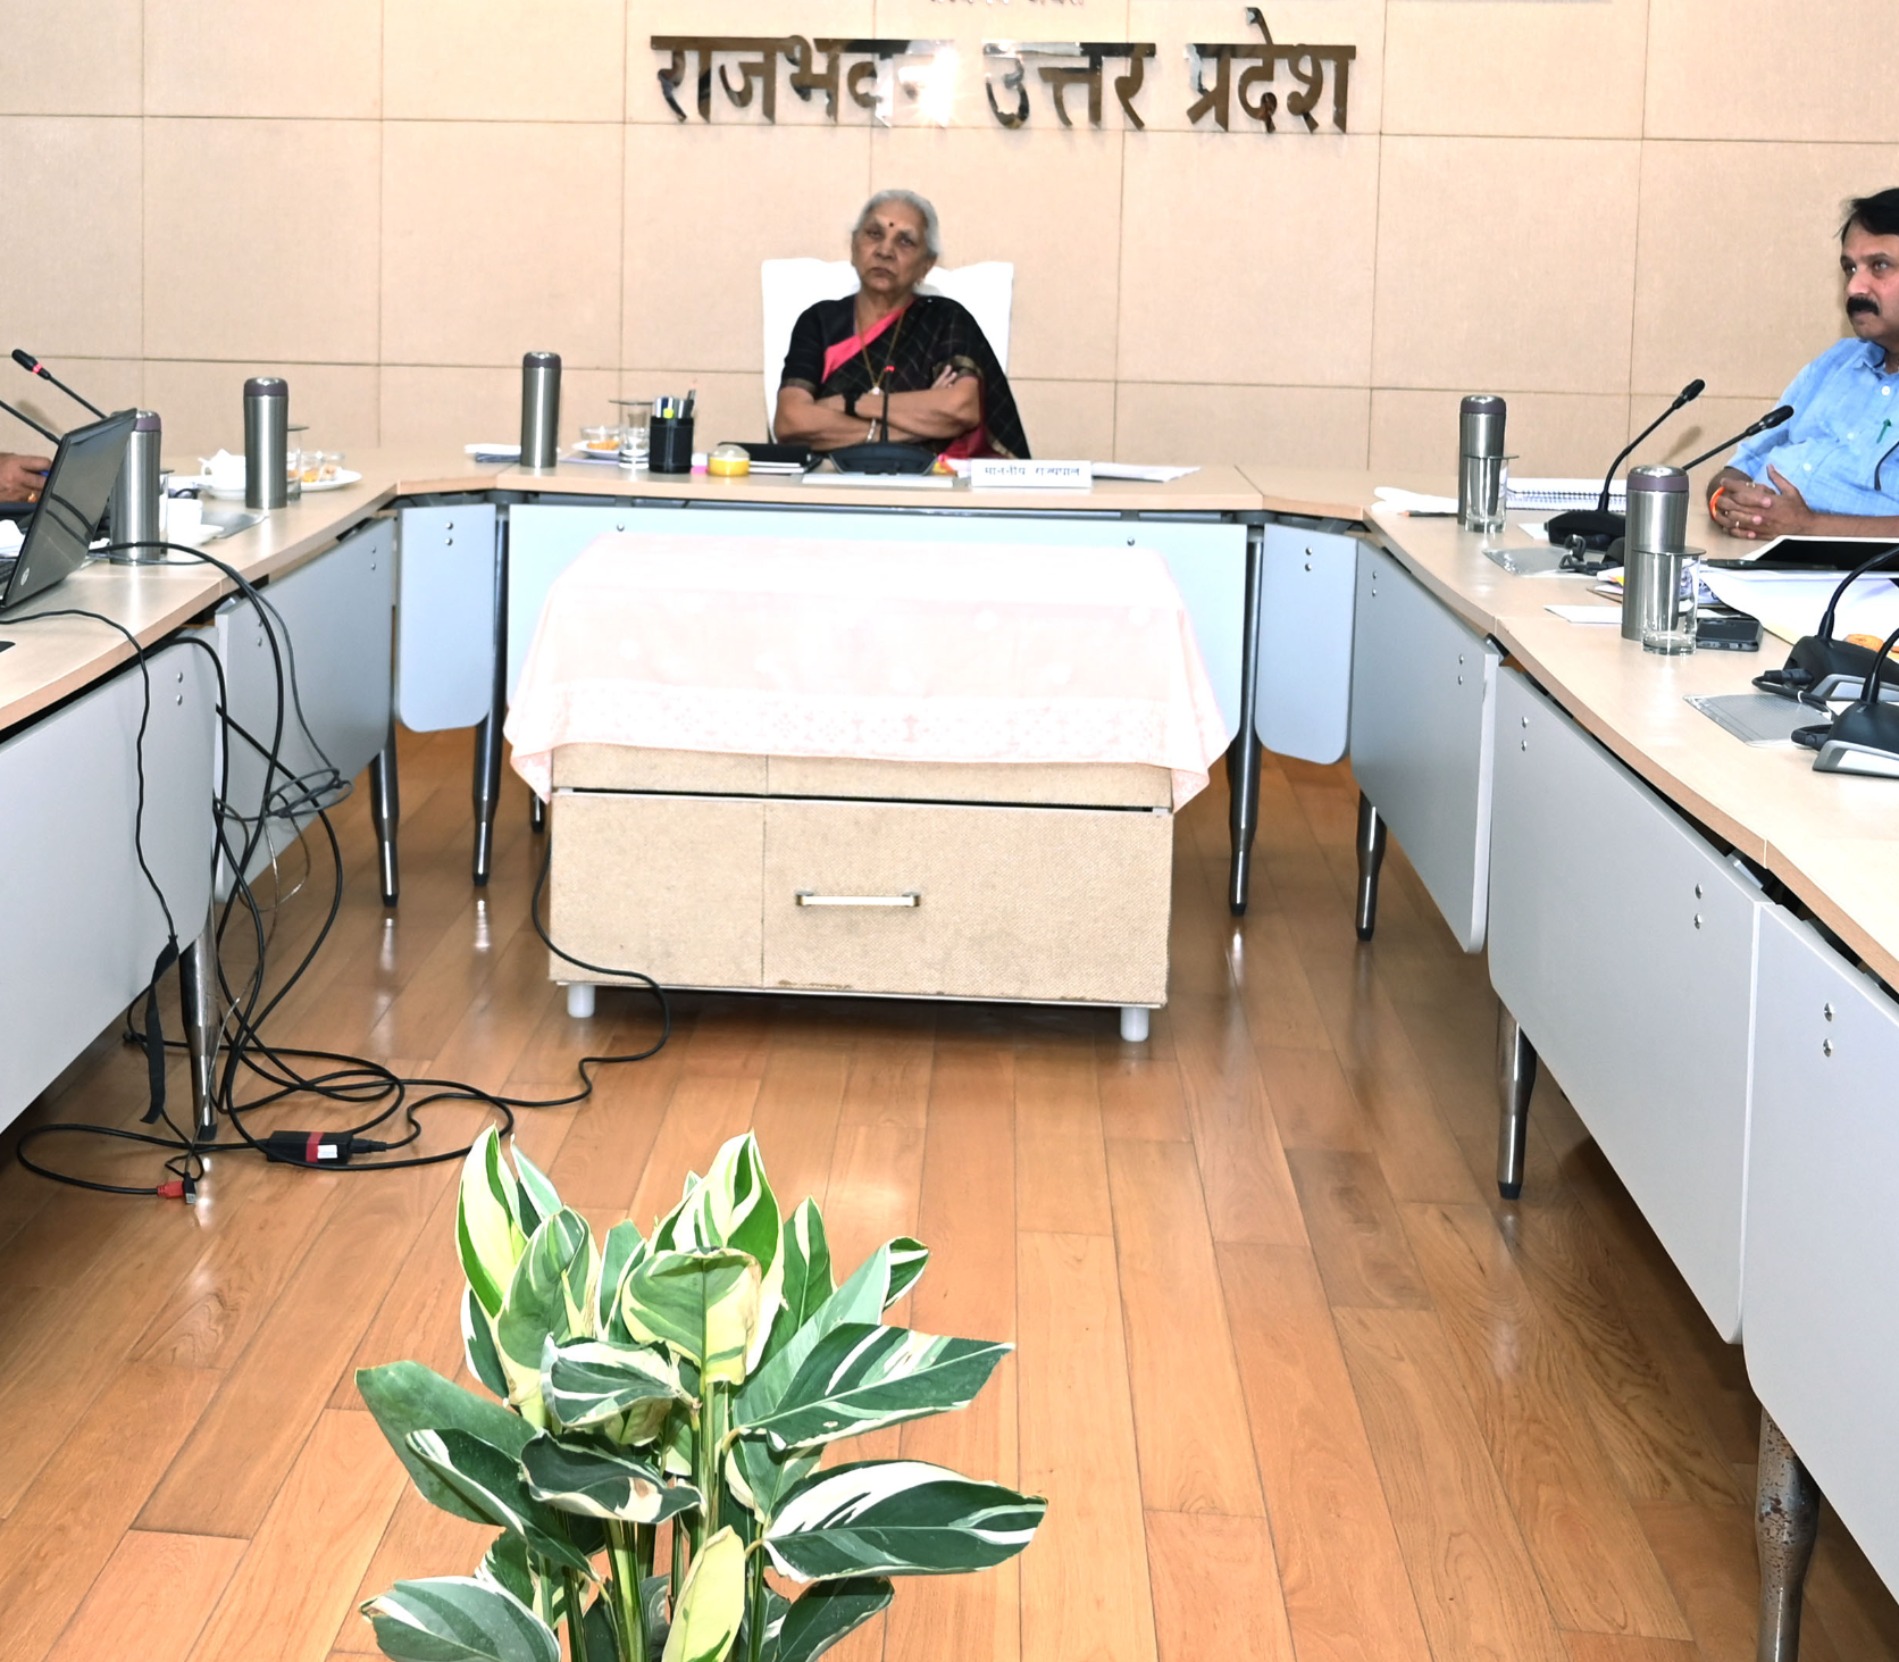  Governor Smt. Anandiben Patel reviewed the presentation of NAAC evaluation of Acharya Narendra Dev Agricultural and Technological University, Ayodhya  